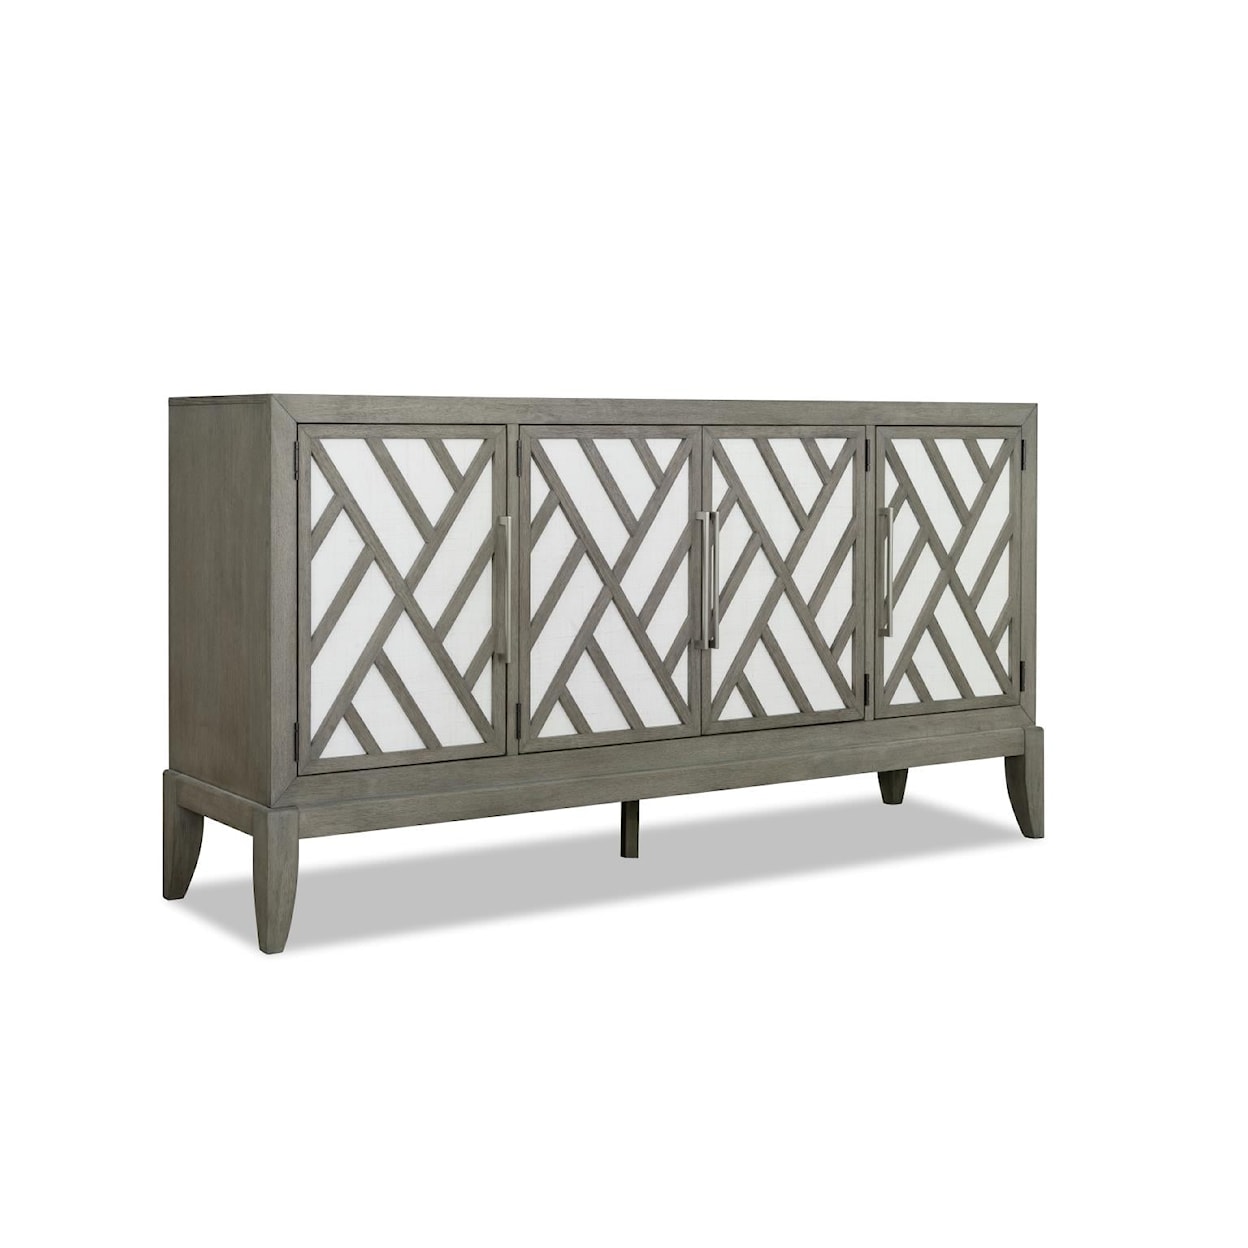 Trisha Yearwood Home Collection by Legacy Classic Staycation Credenza